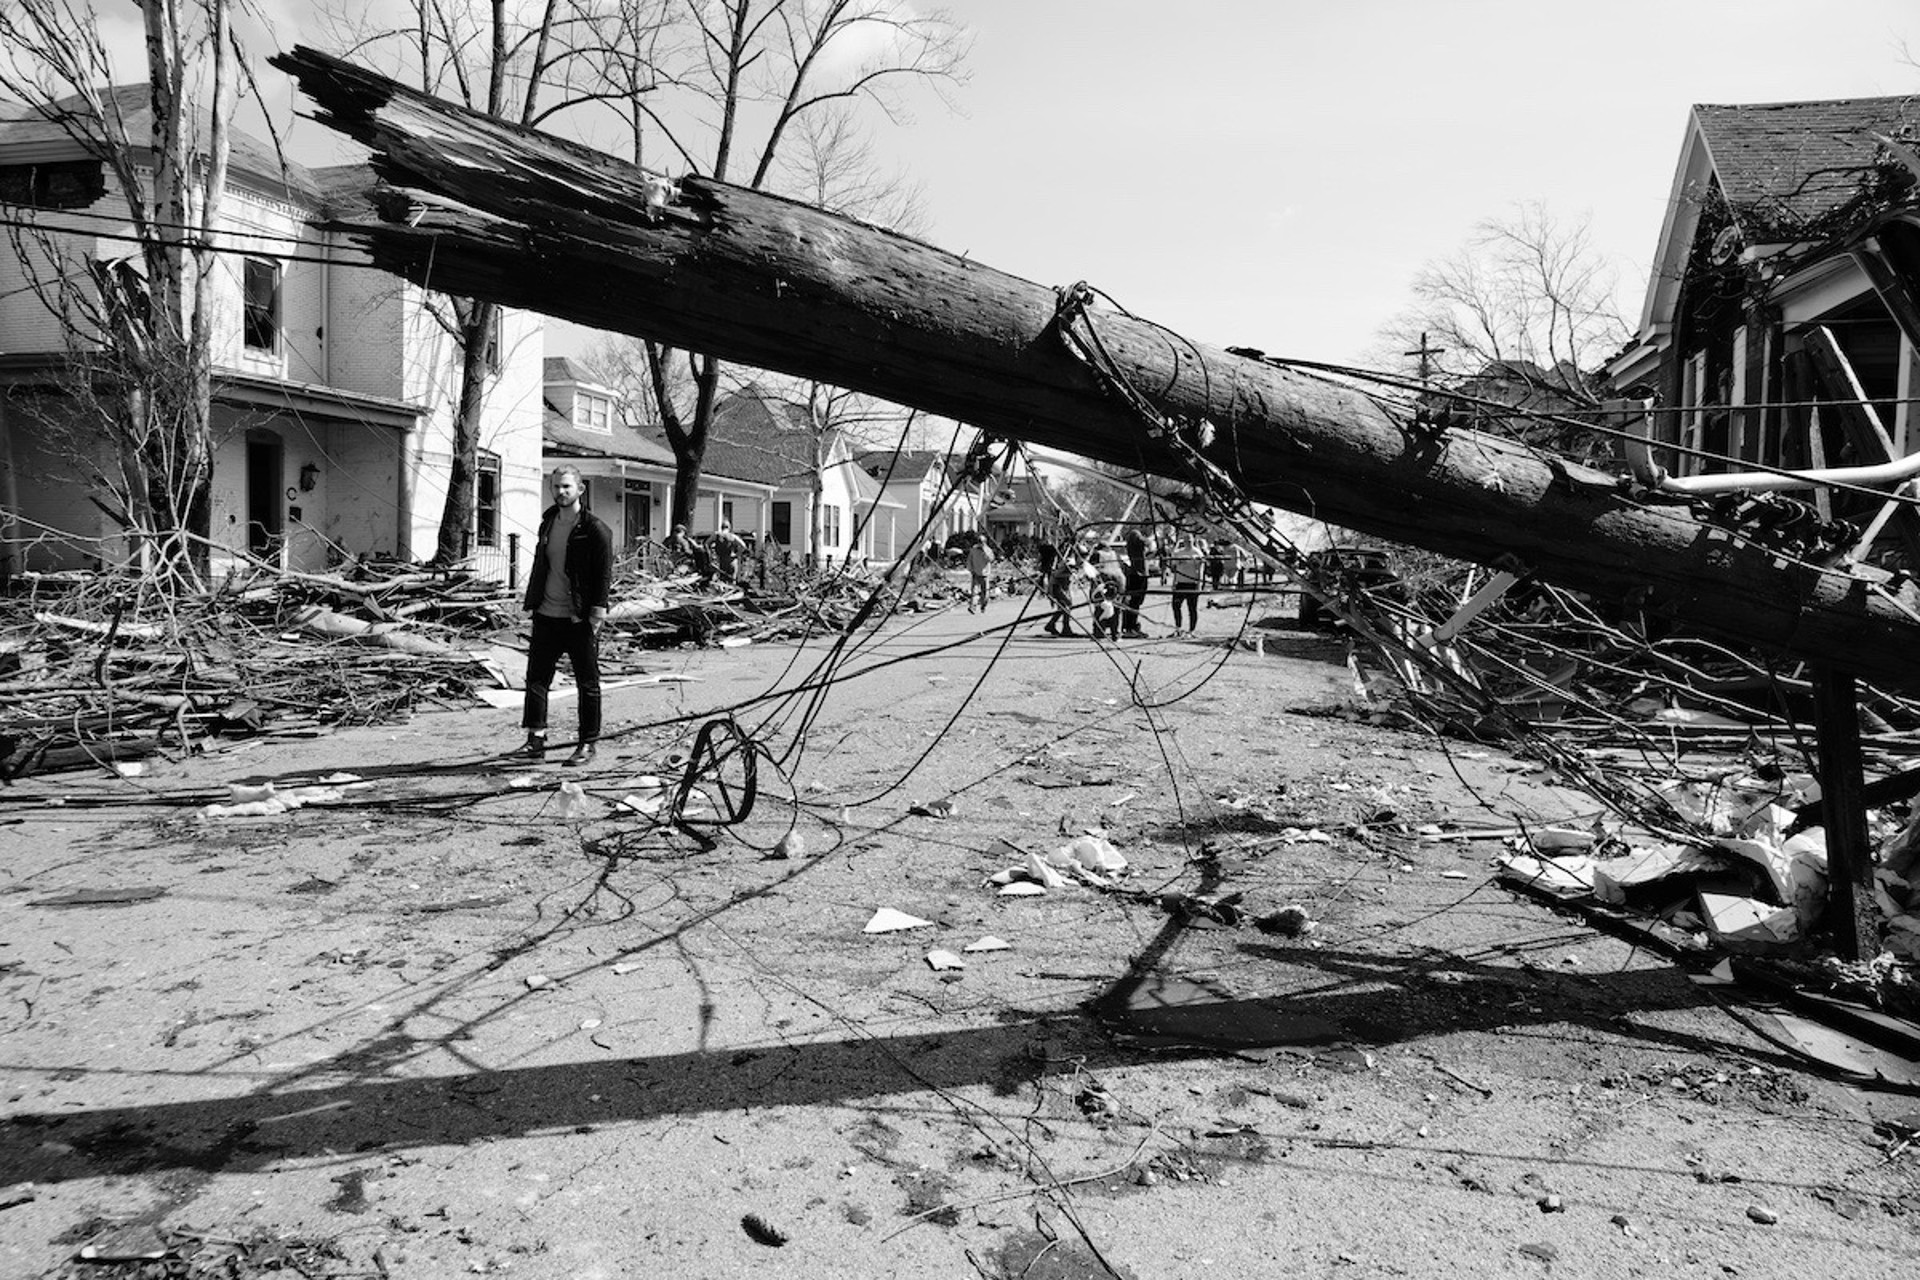 Aftermath, East Nashville, March 3rd, 2020 by Stacy Widelitz